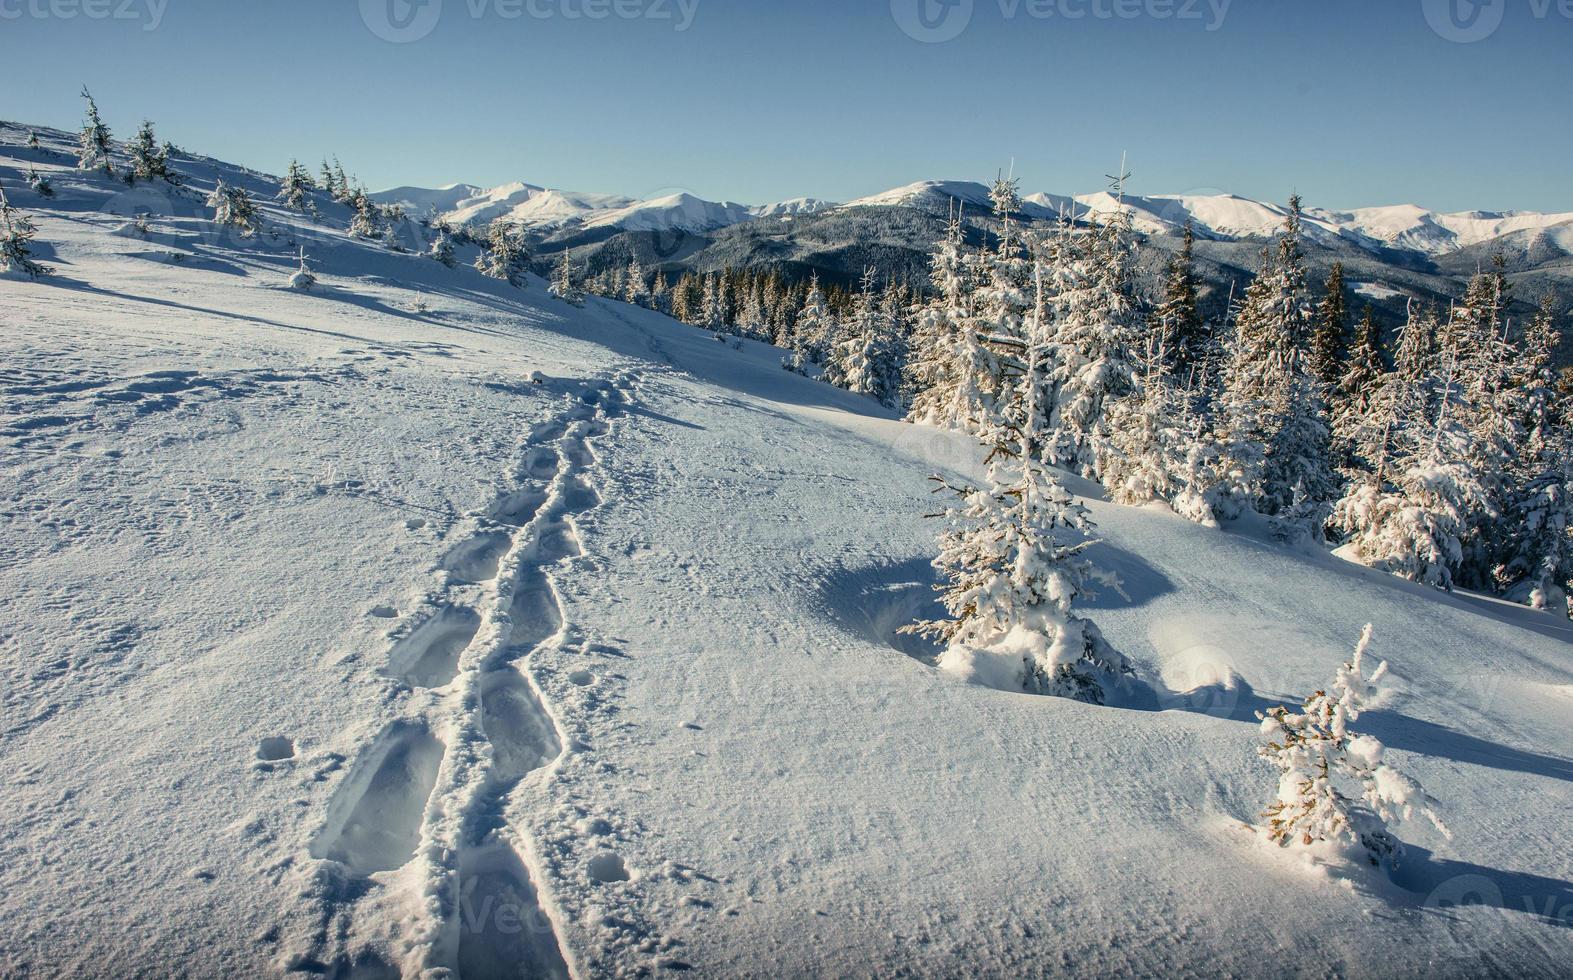 Fantastic winter landscape and trodden trails that lead into the photo